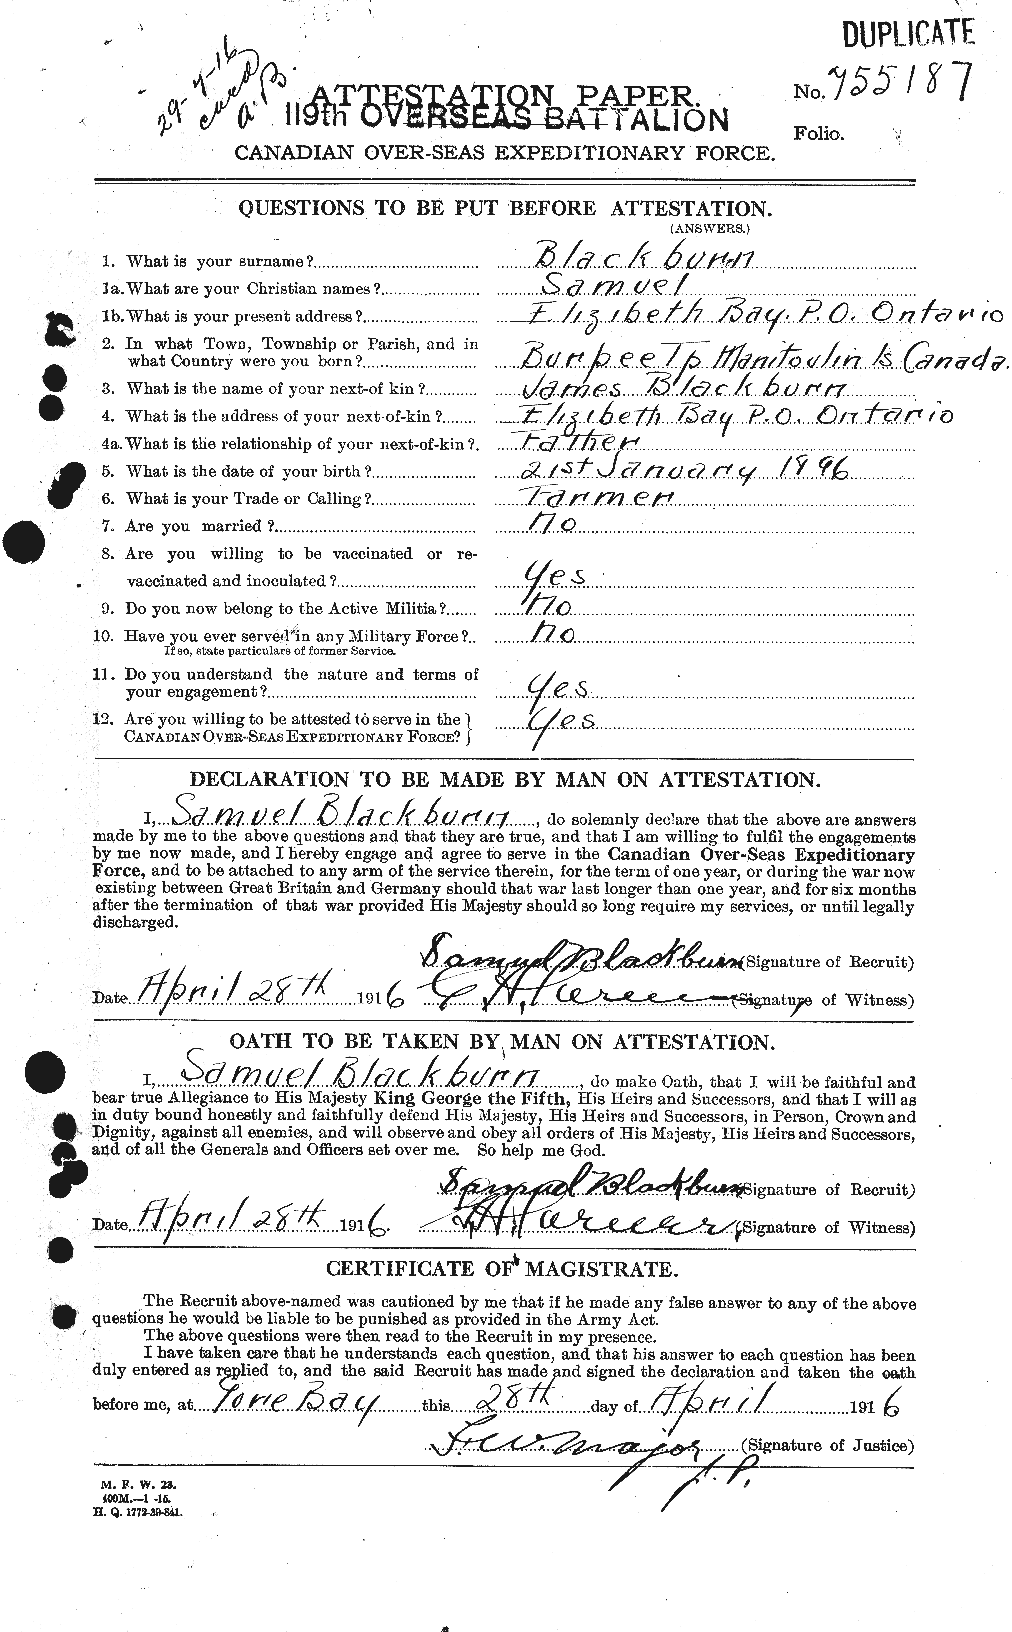 Personnel Records of the First World War - CEF 246421a